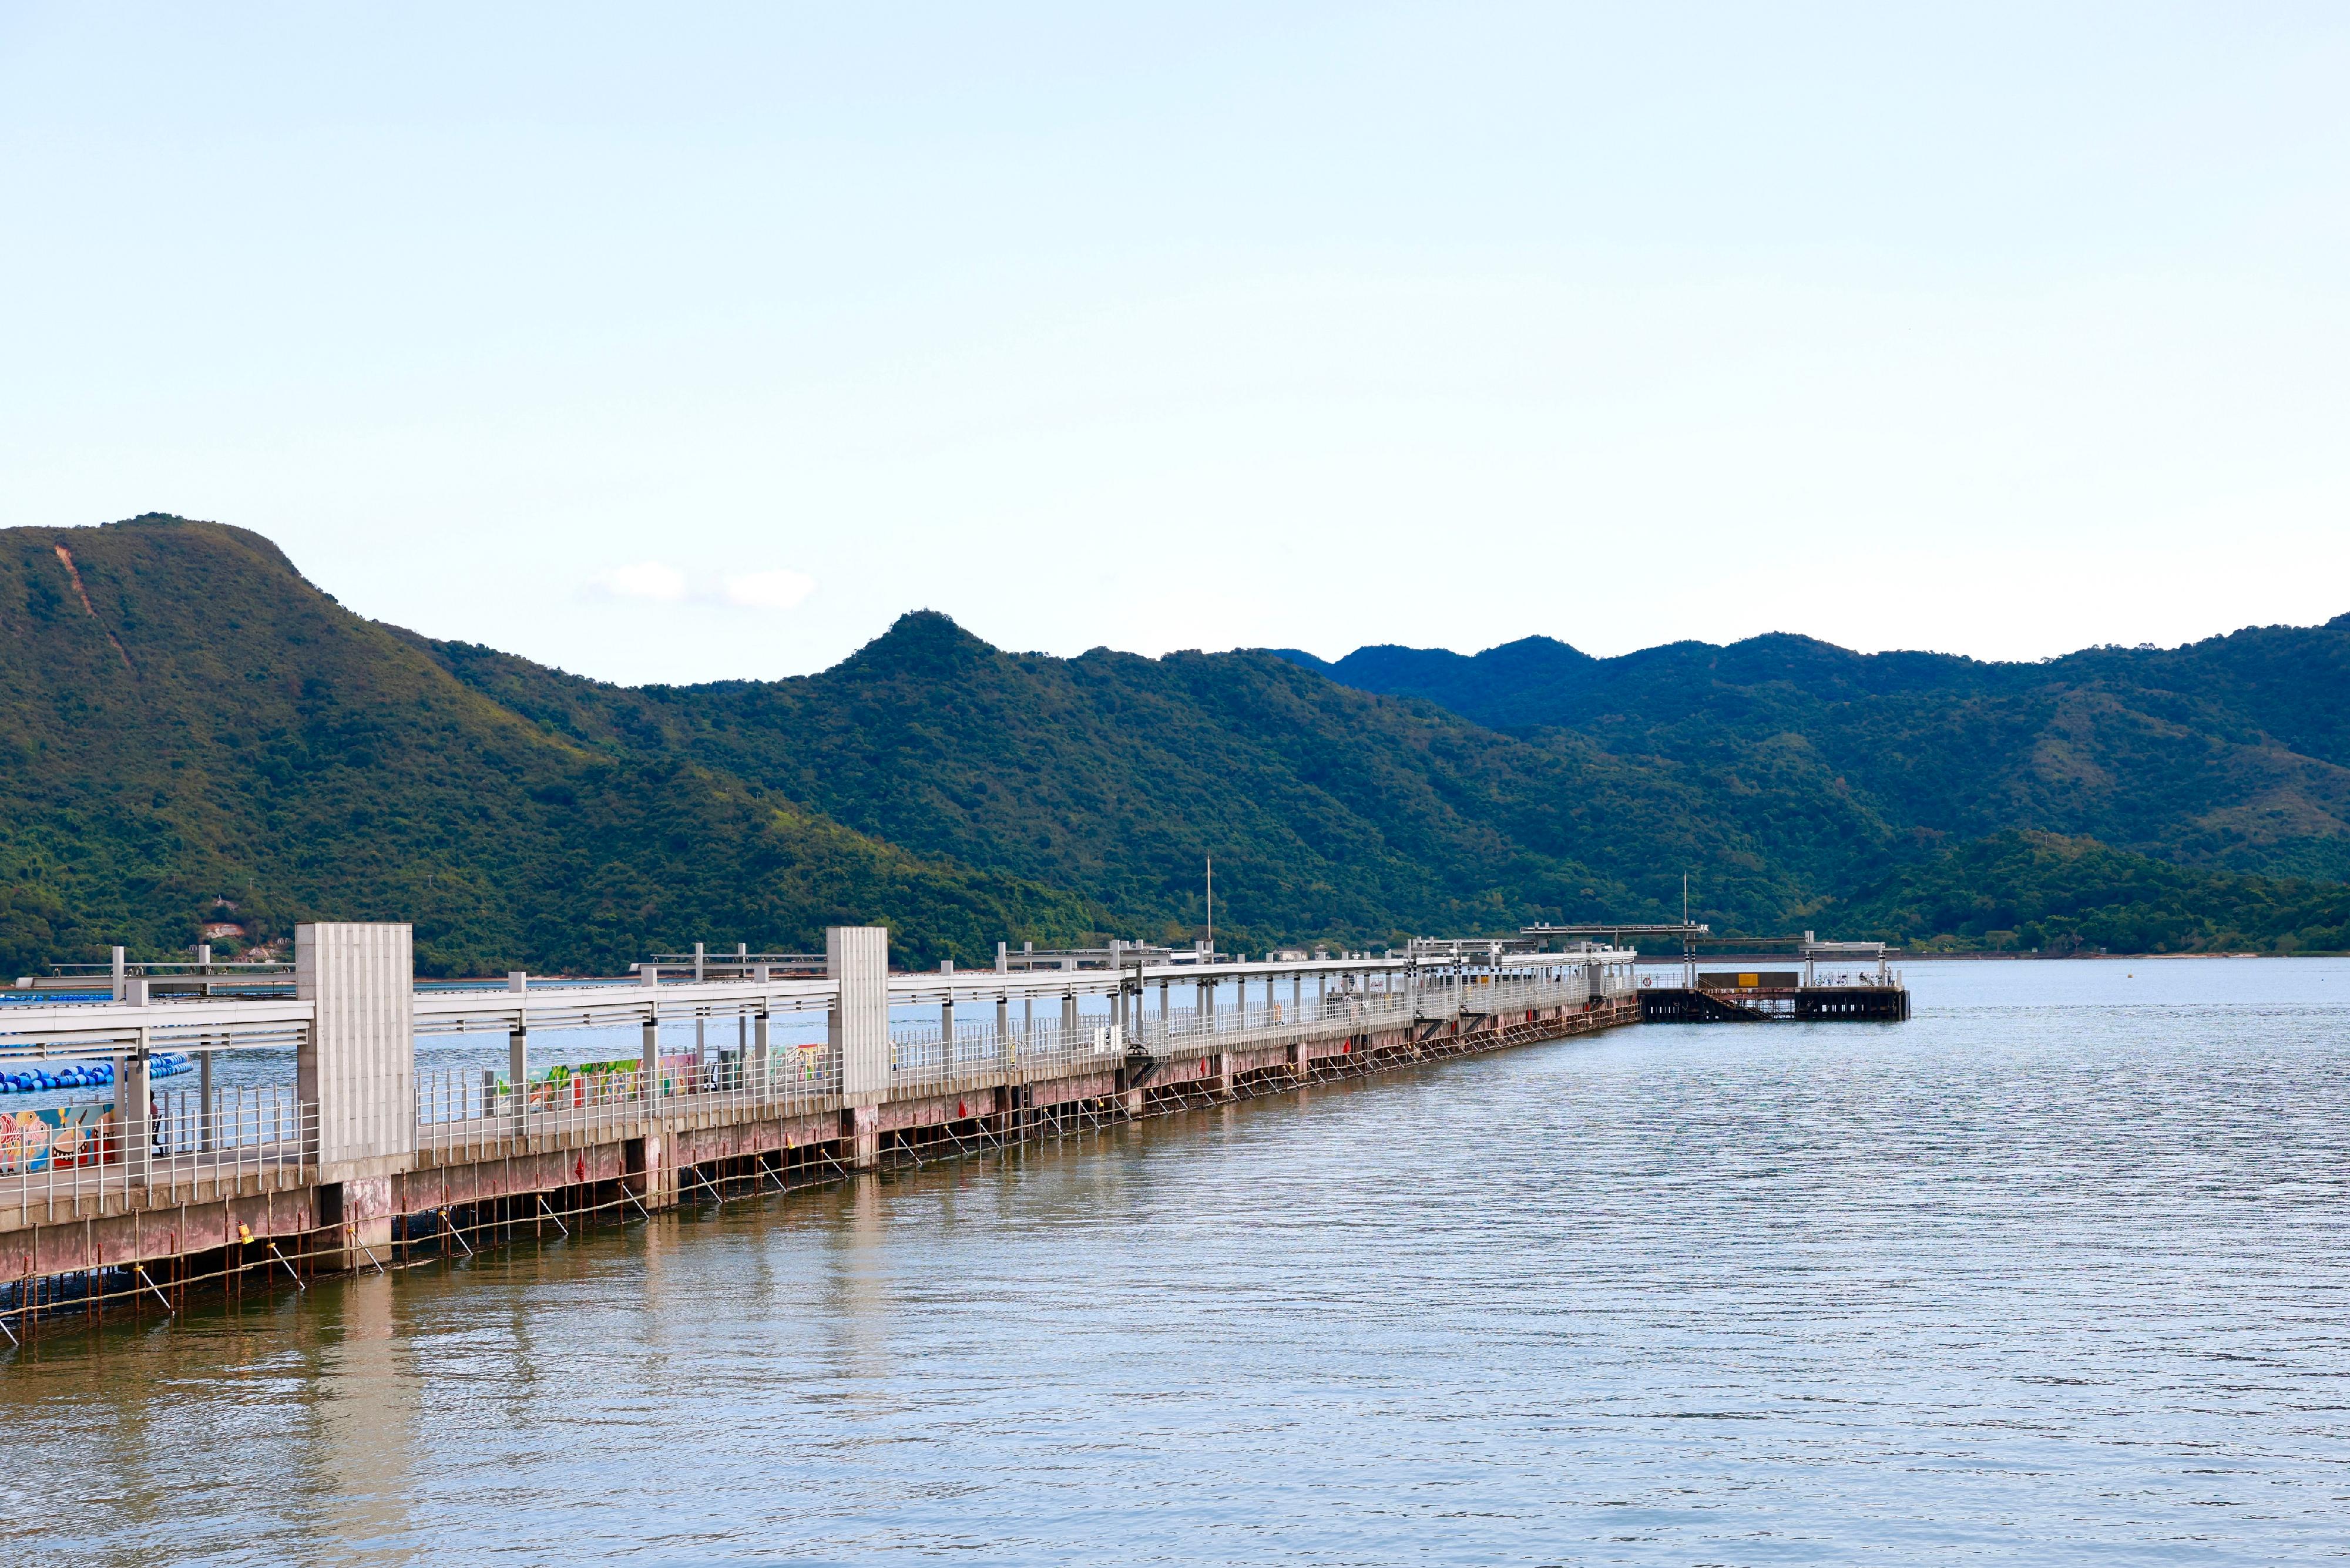 The Second Phase Opening-up of Sha Tau Kok will begin on January 1 next year. Initially, up to 1,000 tourists per day will be allowed to visit all parts of Sha Tau Kok, except Chung Ying Street, after applying online for a Closed Area Permit. Photo shows the longest pier in Hong Kong, Sha Tau Kok Pier.